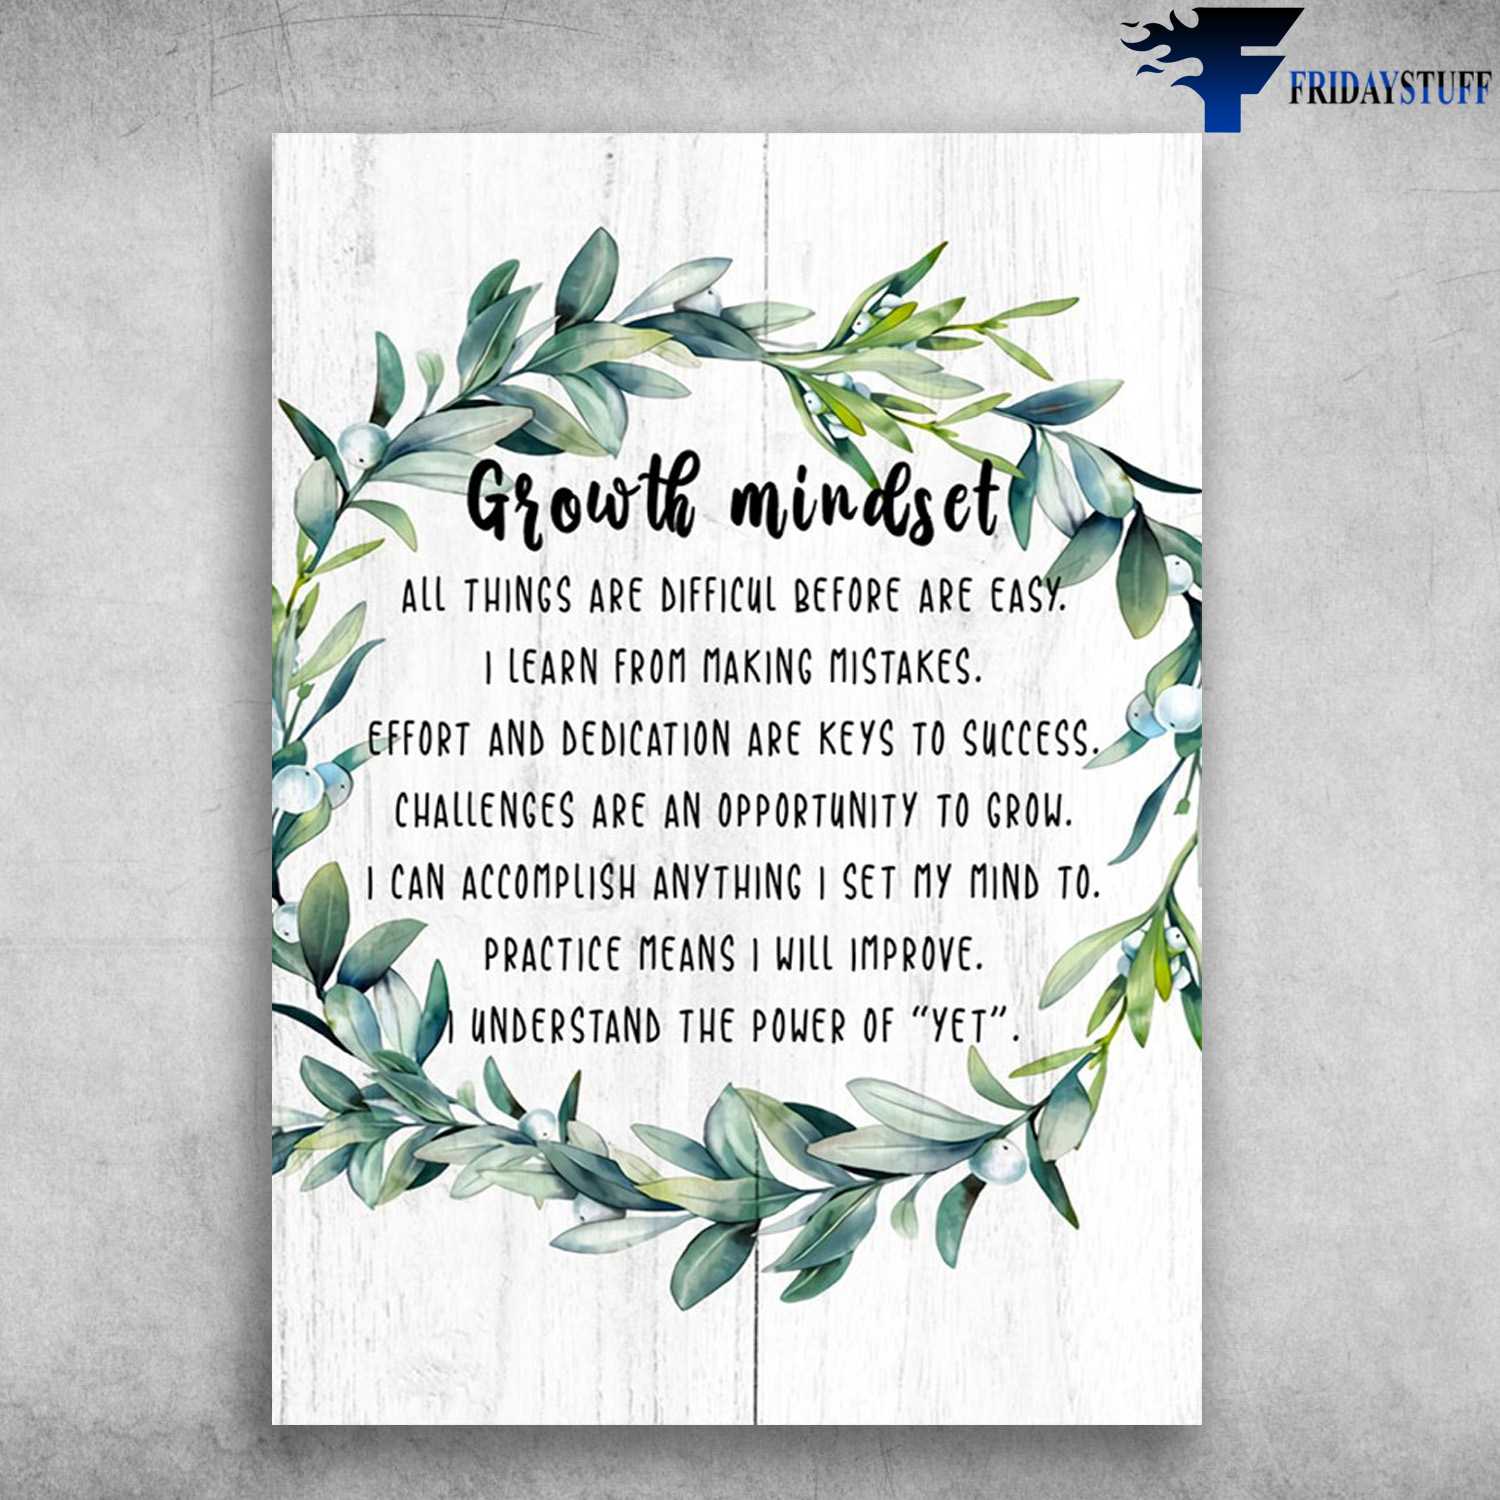 Growth Mindset Poster – All Things Are Difficult Before They Are Easy, I Learn From Making Mistakes, Effort And Dedication Are Keys To Success